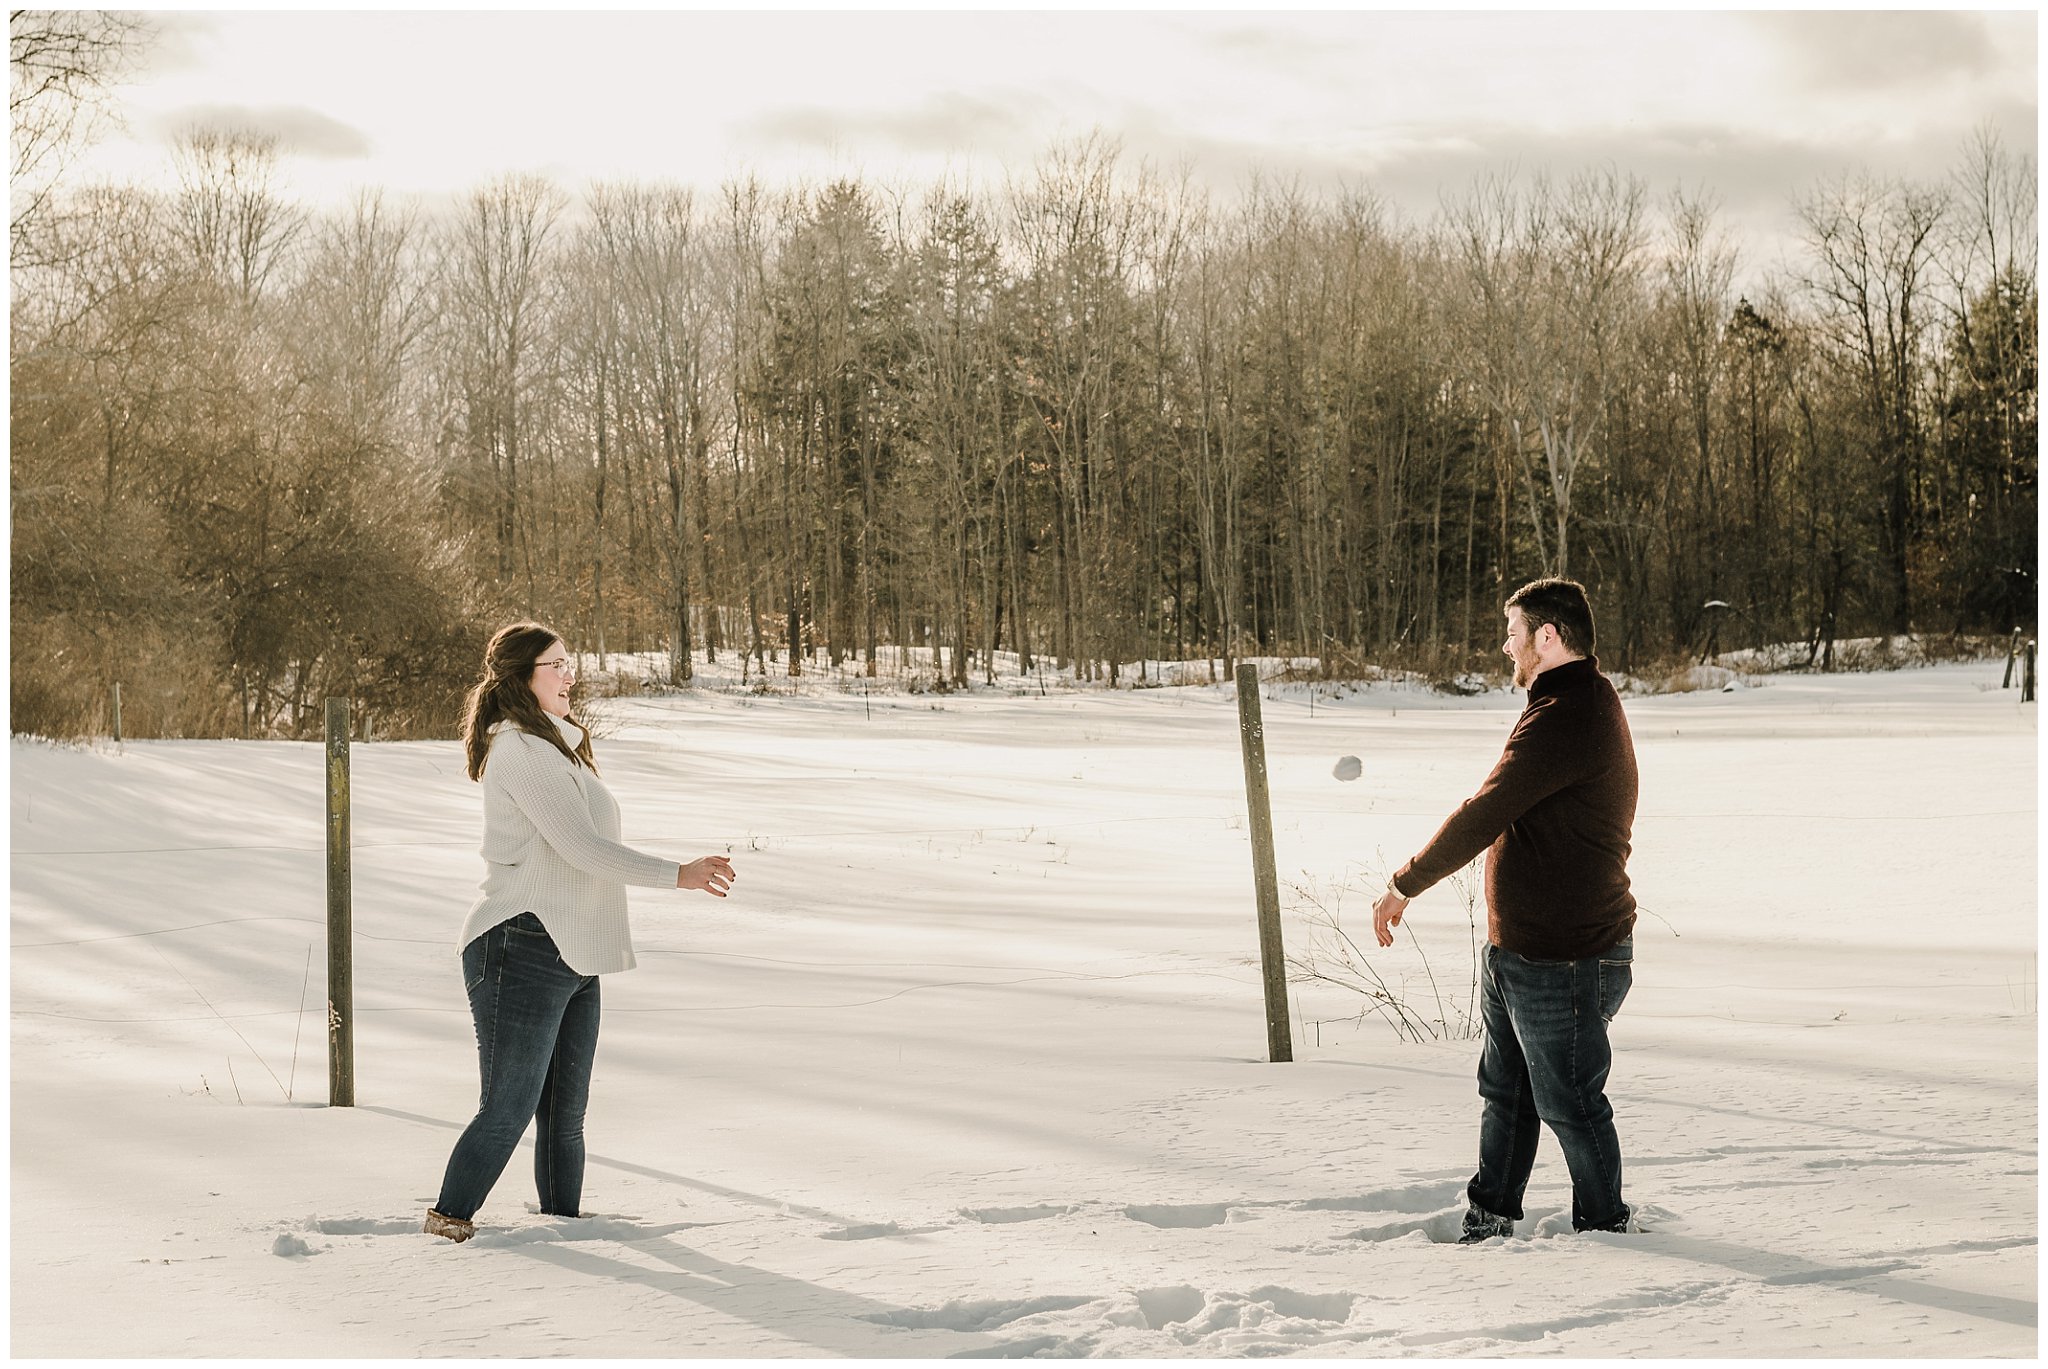 Central New York Engagement Session,Engagement Photographer,Farm Engagement Session,Upstate New York Engagement Session,Wedding Photographer,Winter Engagement Session,